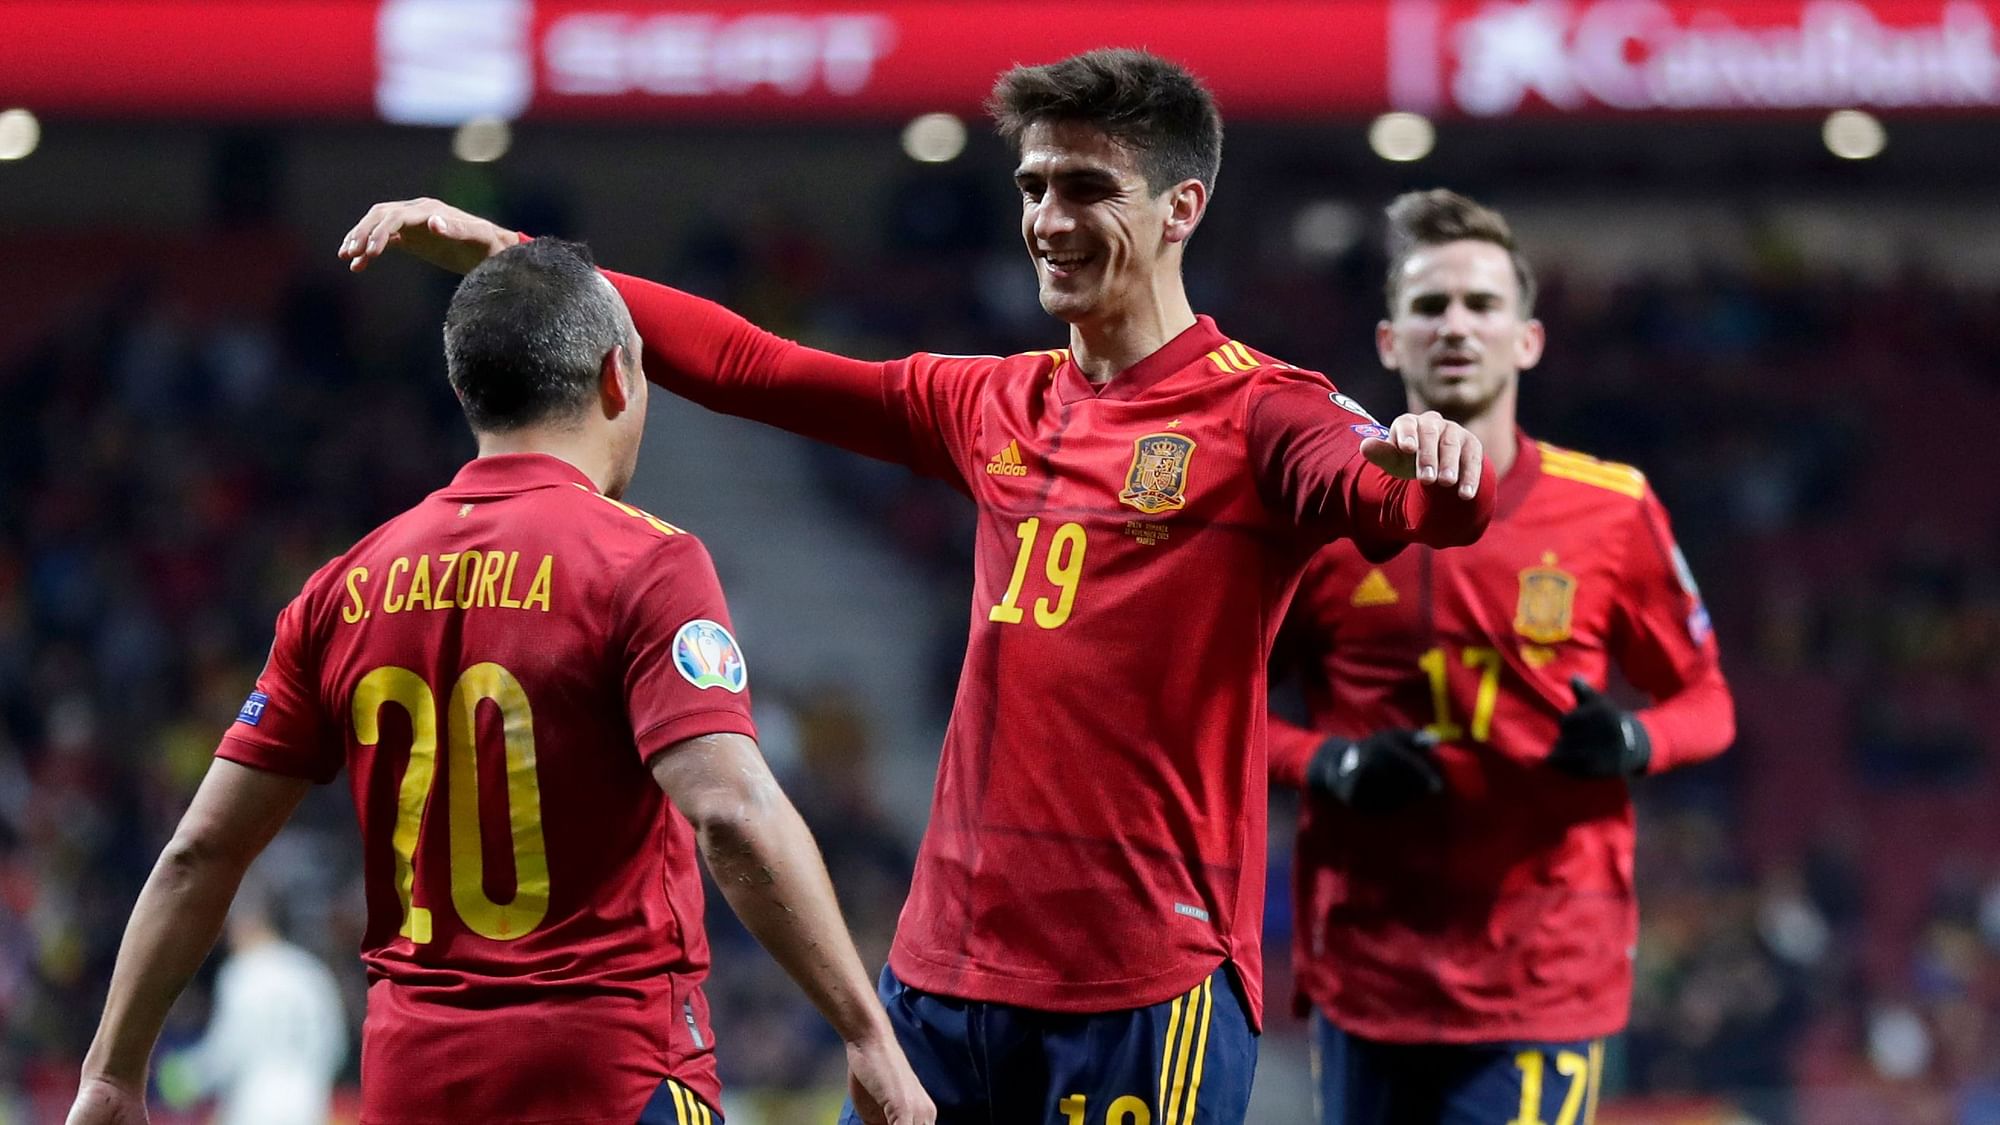 Spain’s Gerard Moreno celebrates with Santi Carzola, left, after scoring his side’s second goal during the Euro 2020 group F qualifying game between Spain and Romania at the Metropolitano stadium in Madrid.